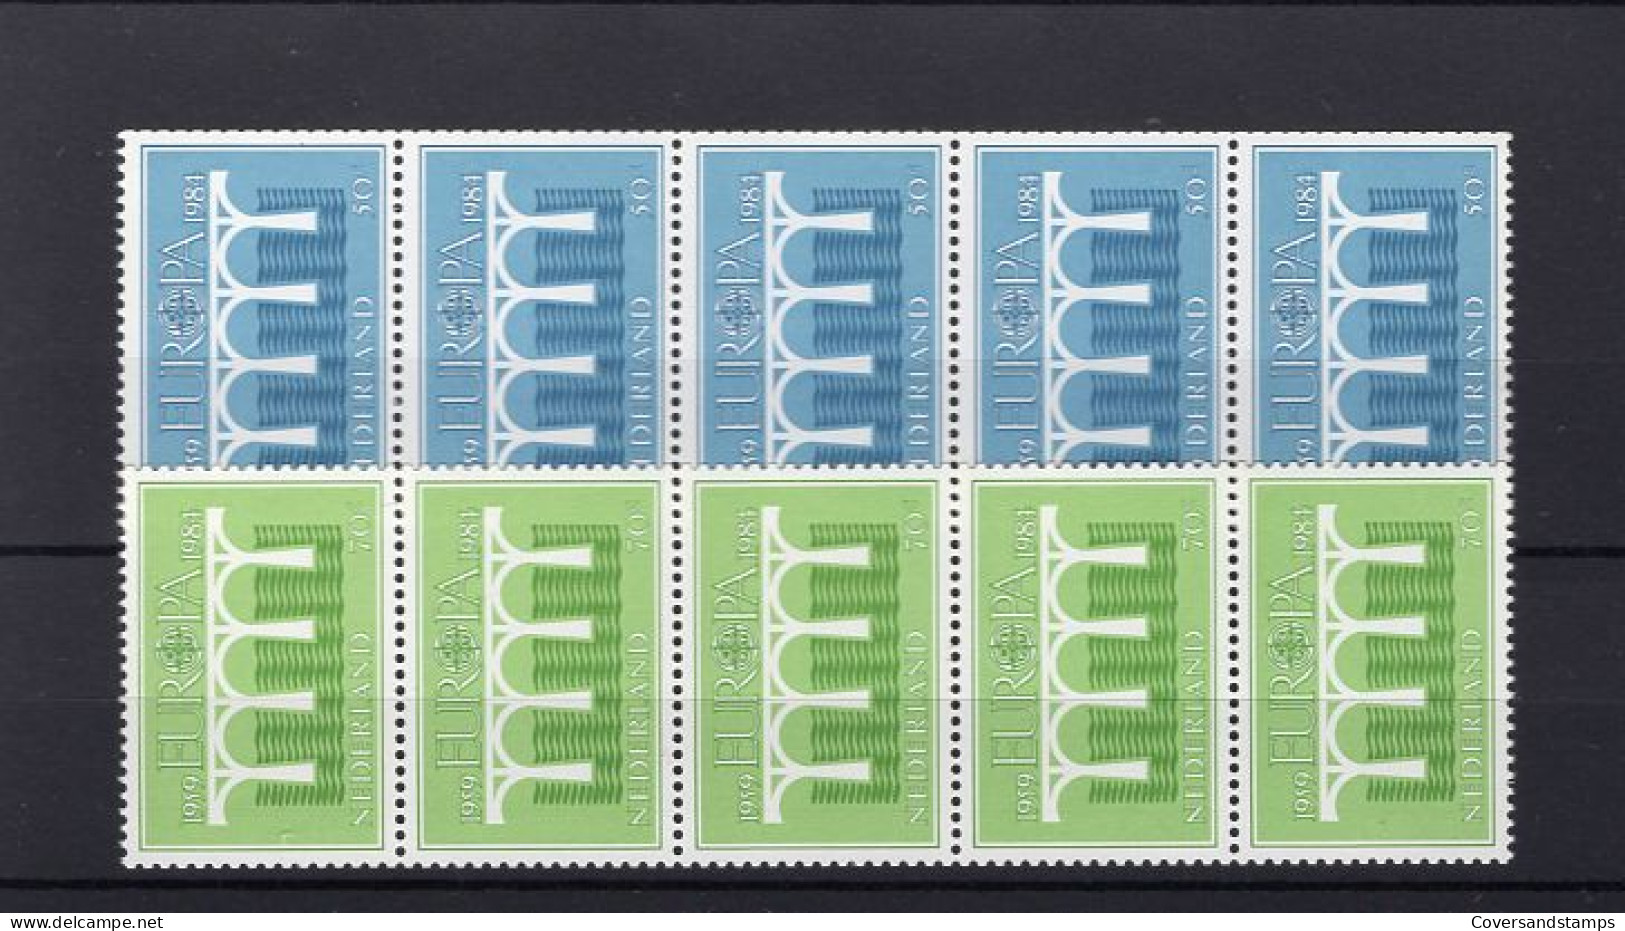  Nederland - NVPH 1307/1308 In Strips Of 5, Number 030 And 065 ** MNH - 1984